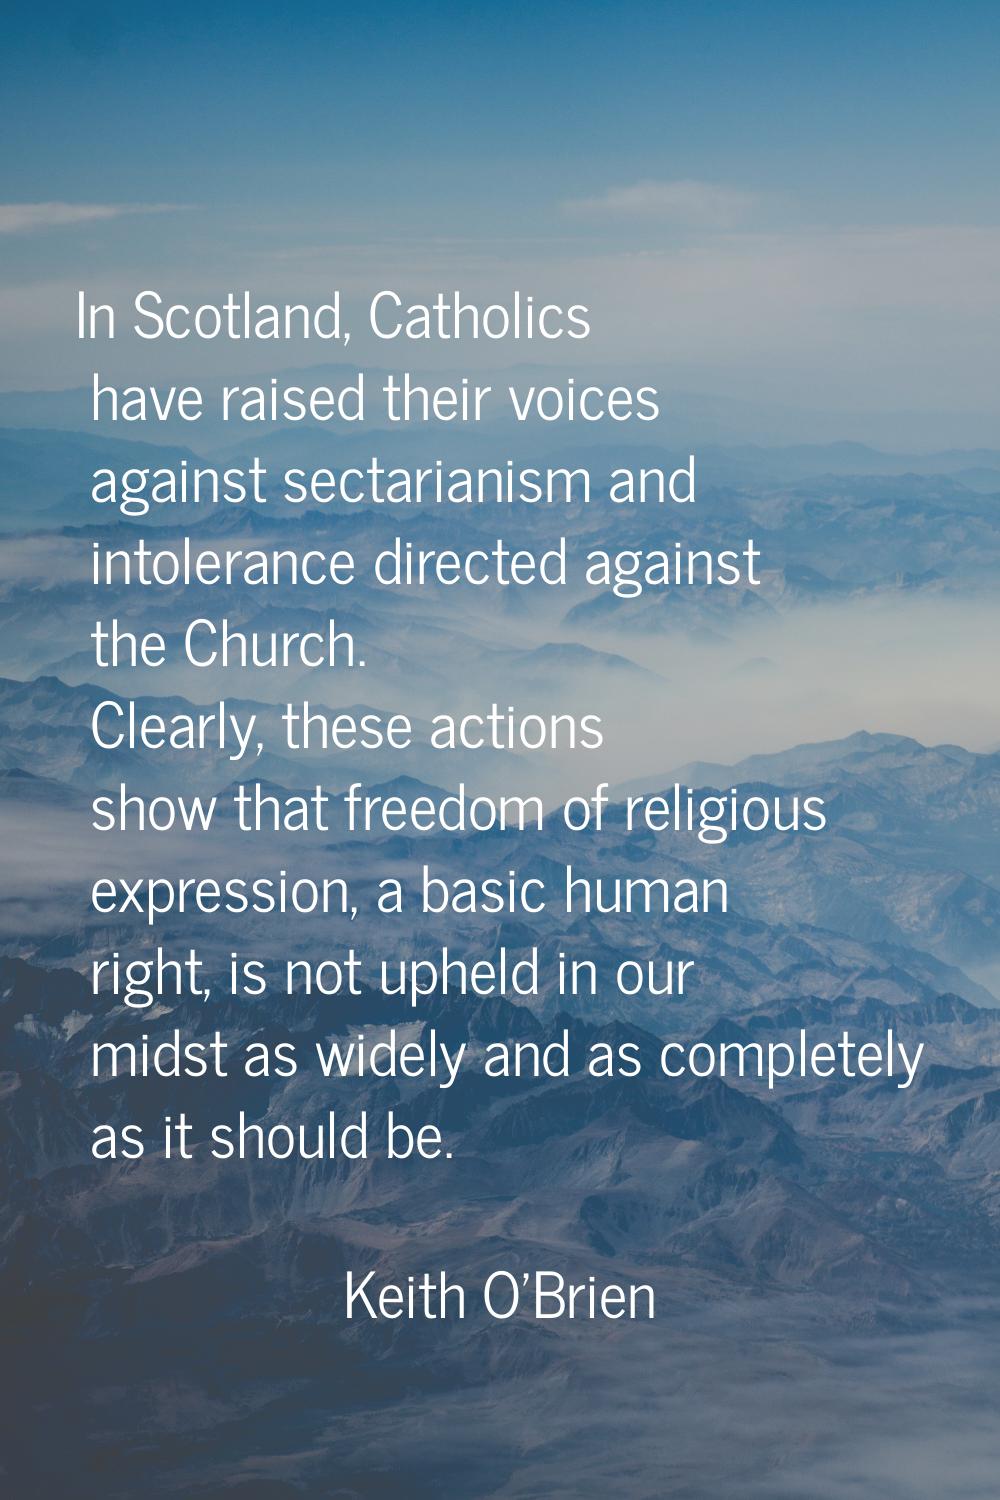 In Scotland, Catholics have raised their voices against sectarianism and intolerance directed again